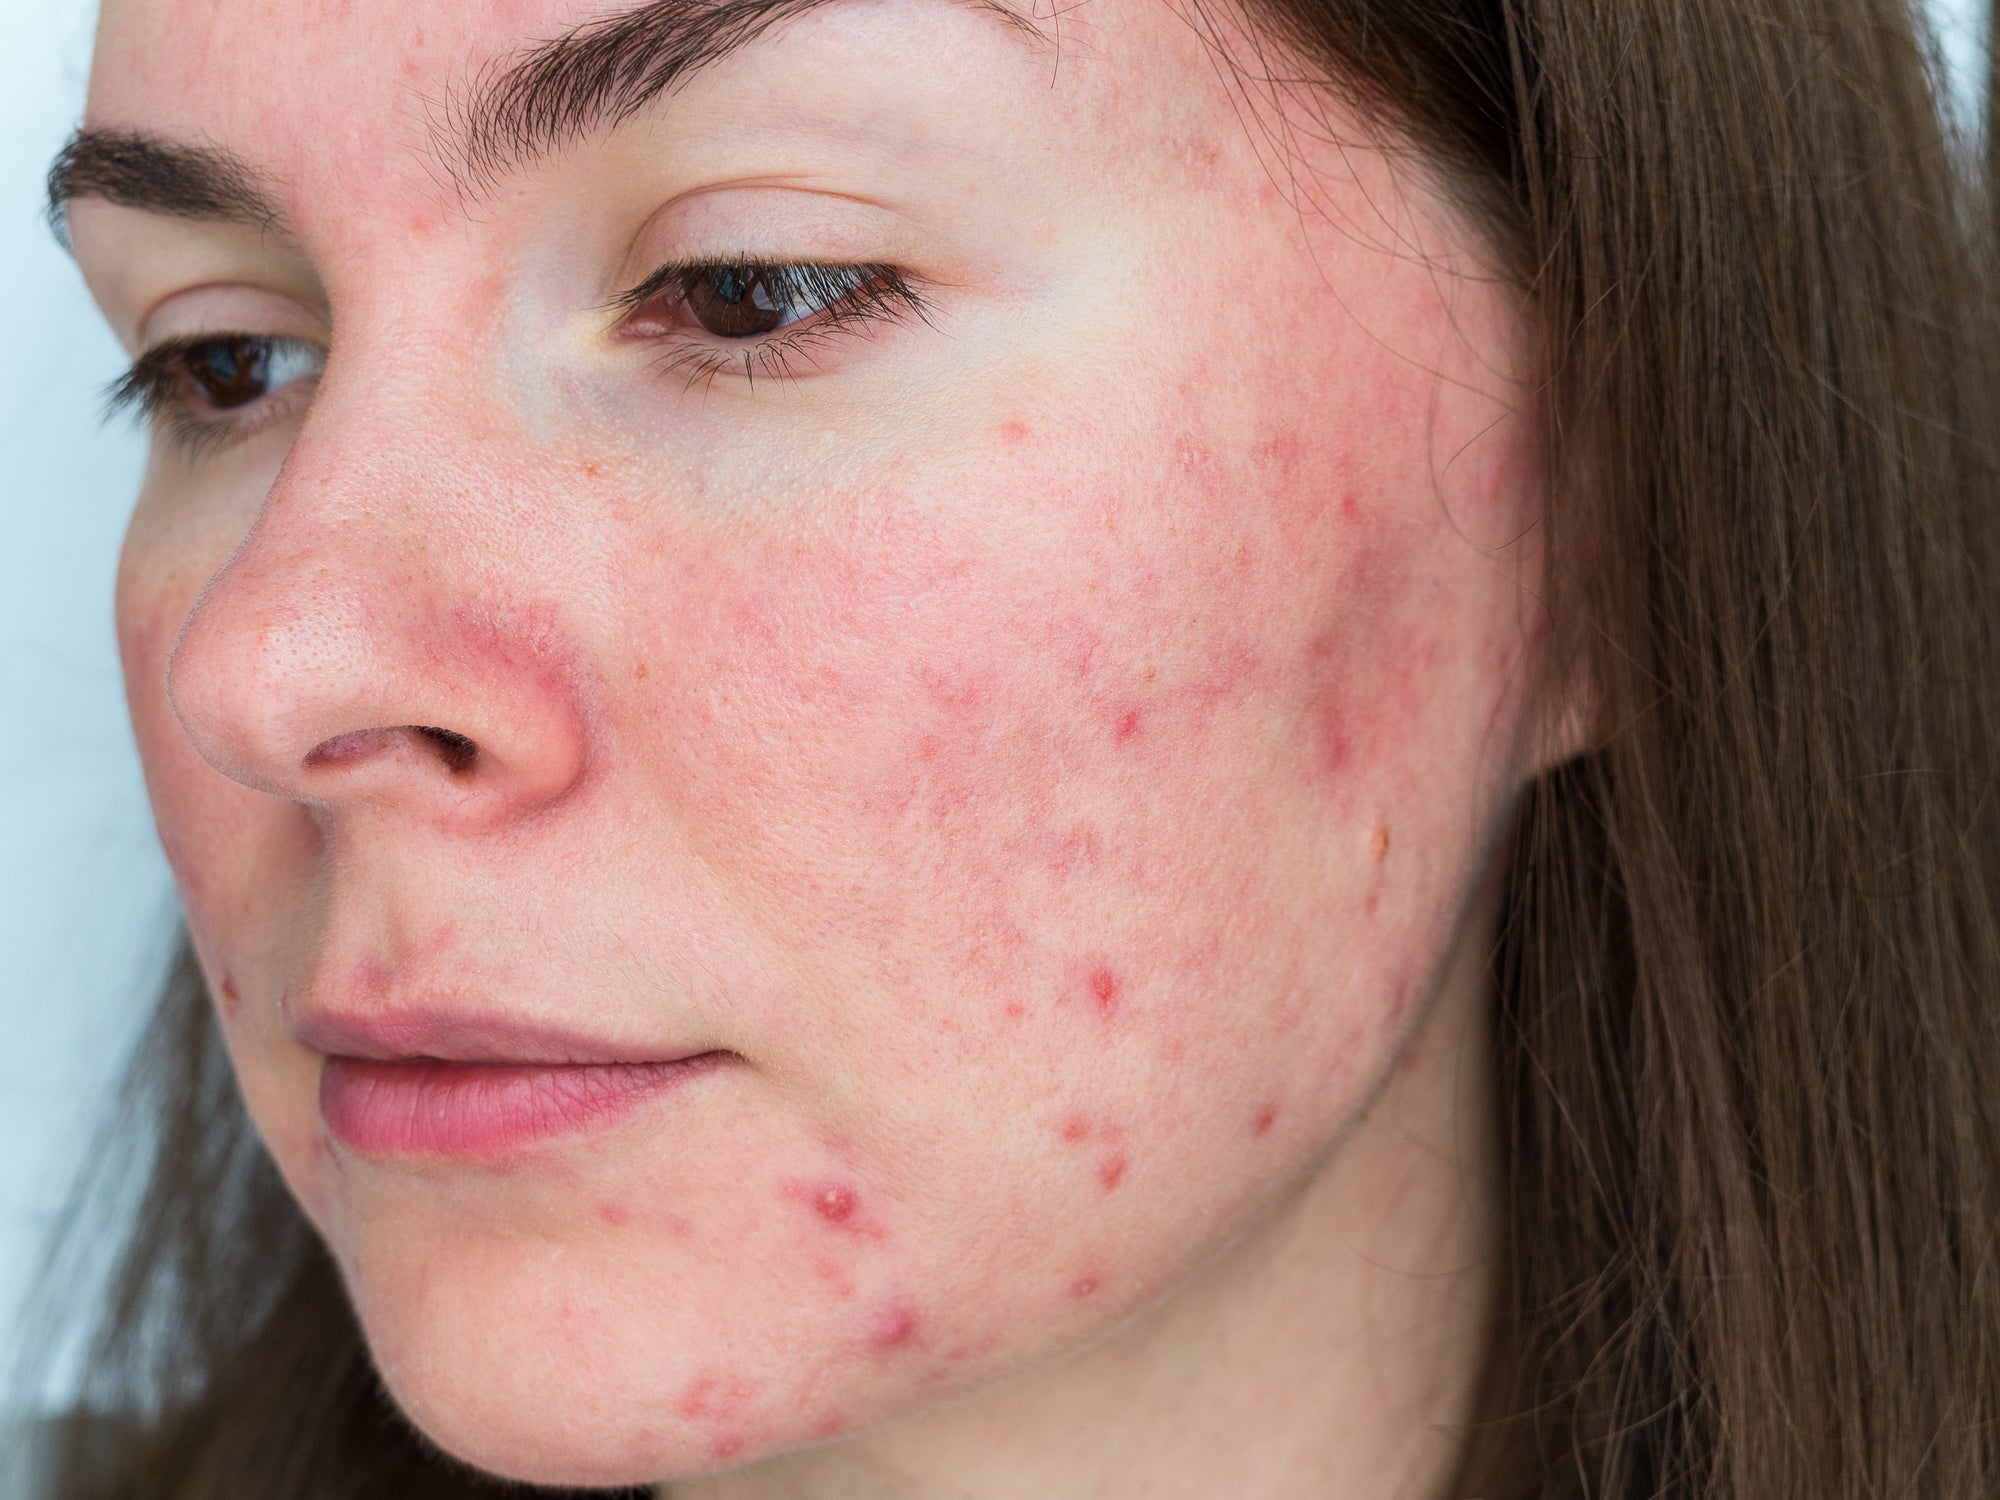 Are Chemical Exfoliations Good For Acne?